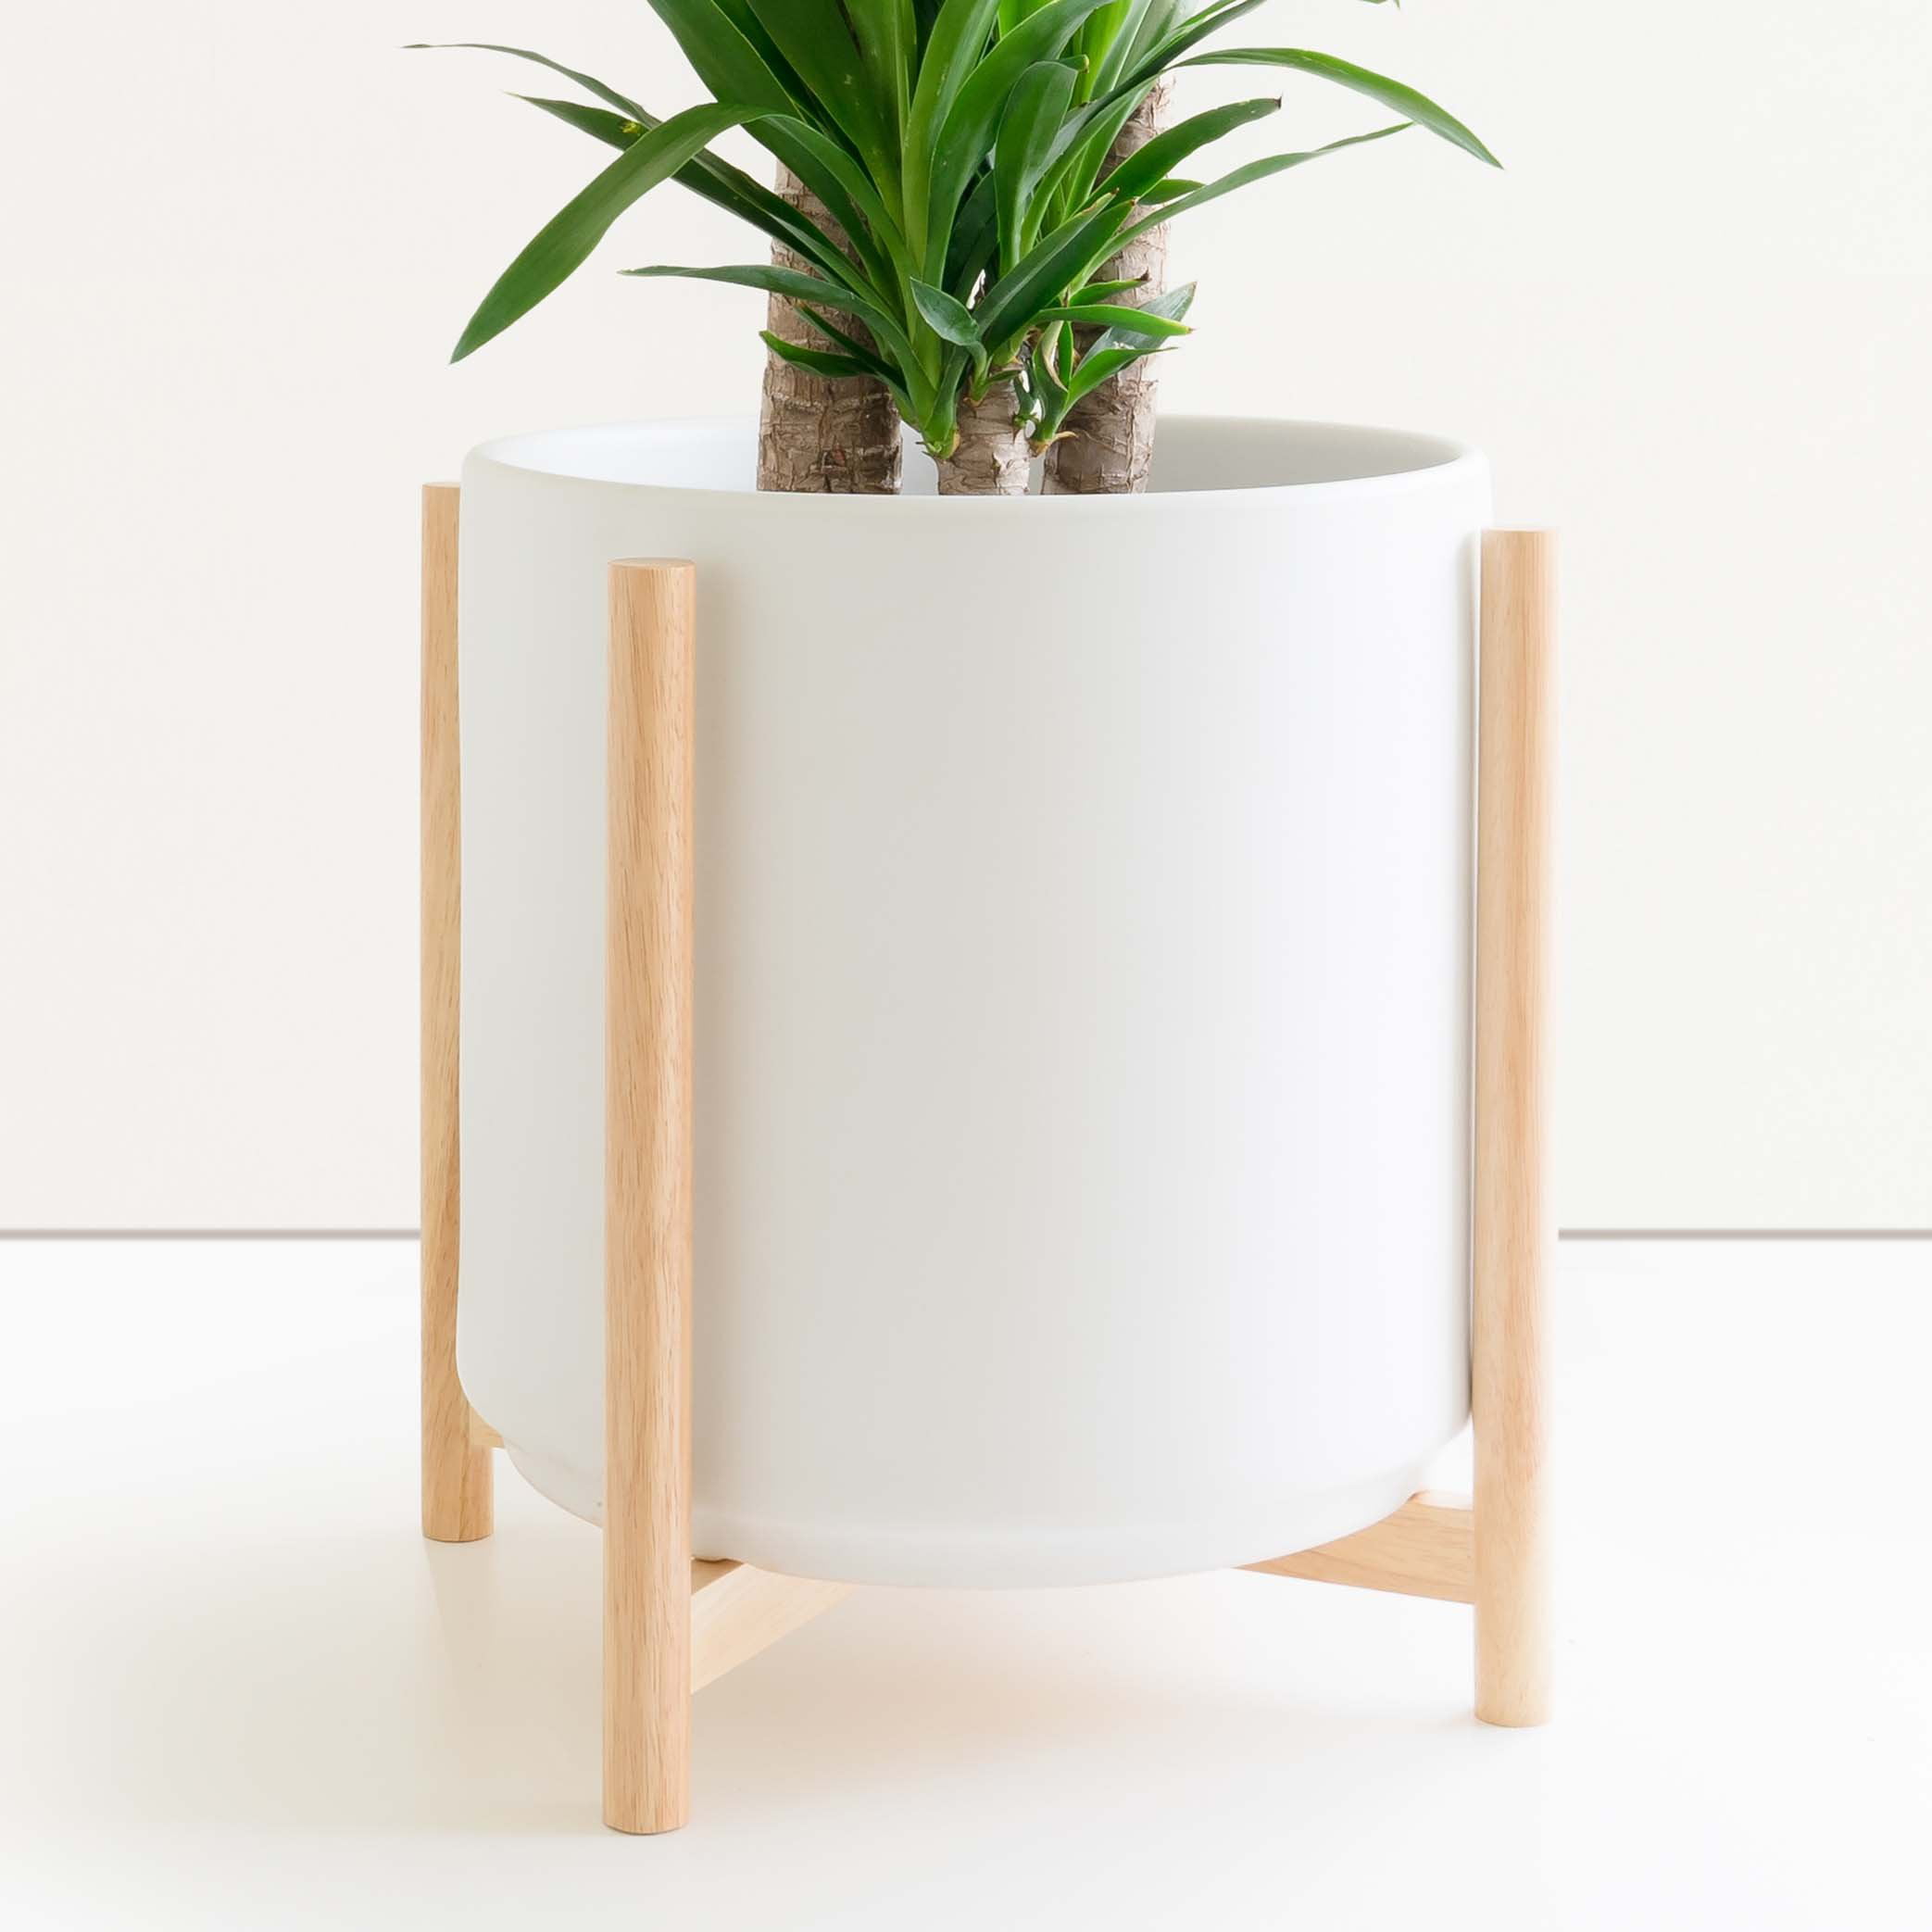 PEACH & PEBBLE 7 Set of Two White Contour Ceramic Planter and Plant Stand Ceramic Plant Pot and Wood Plant Stand Set. 